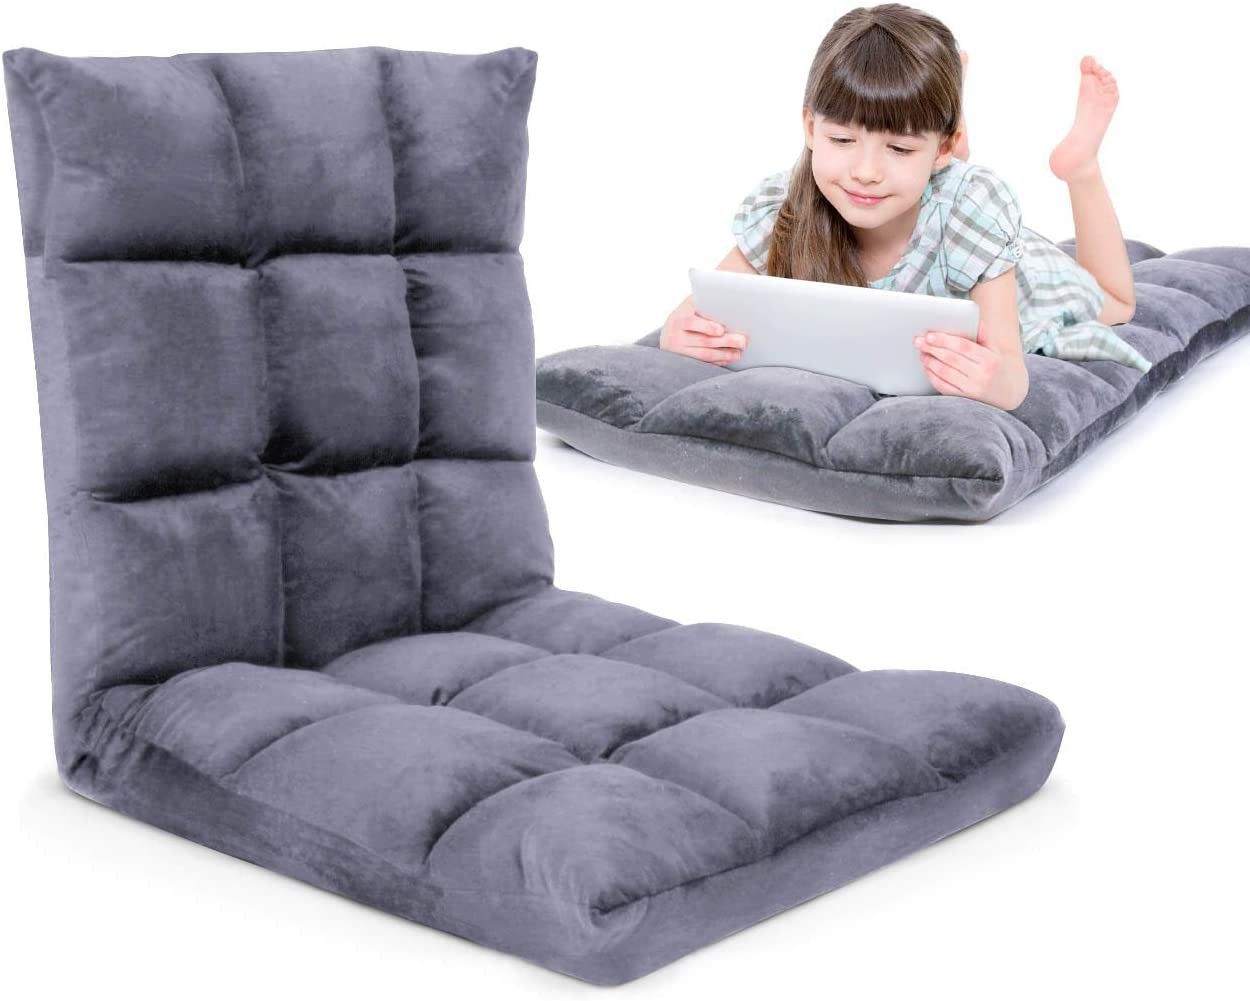 Adjustable Gaming Floor Sofa, Chair for Adults & Kids